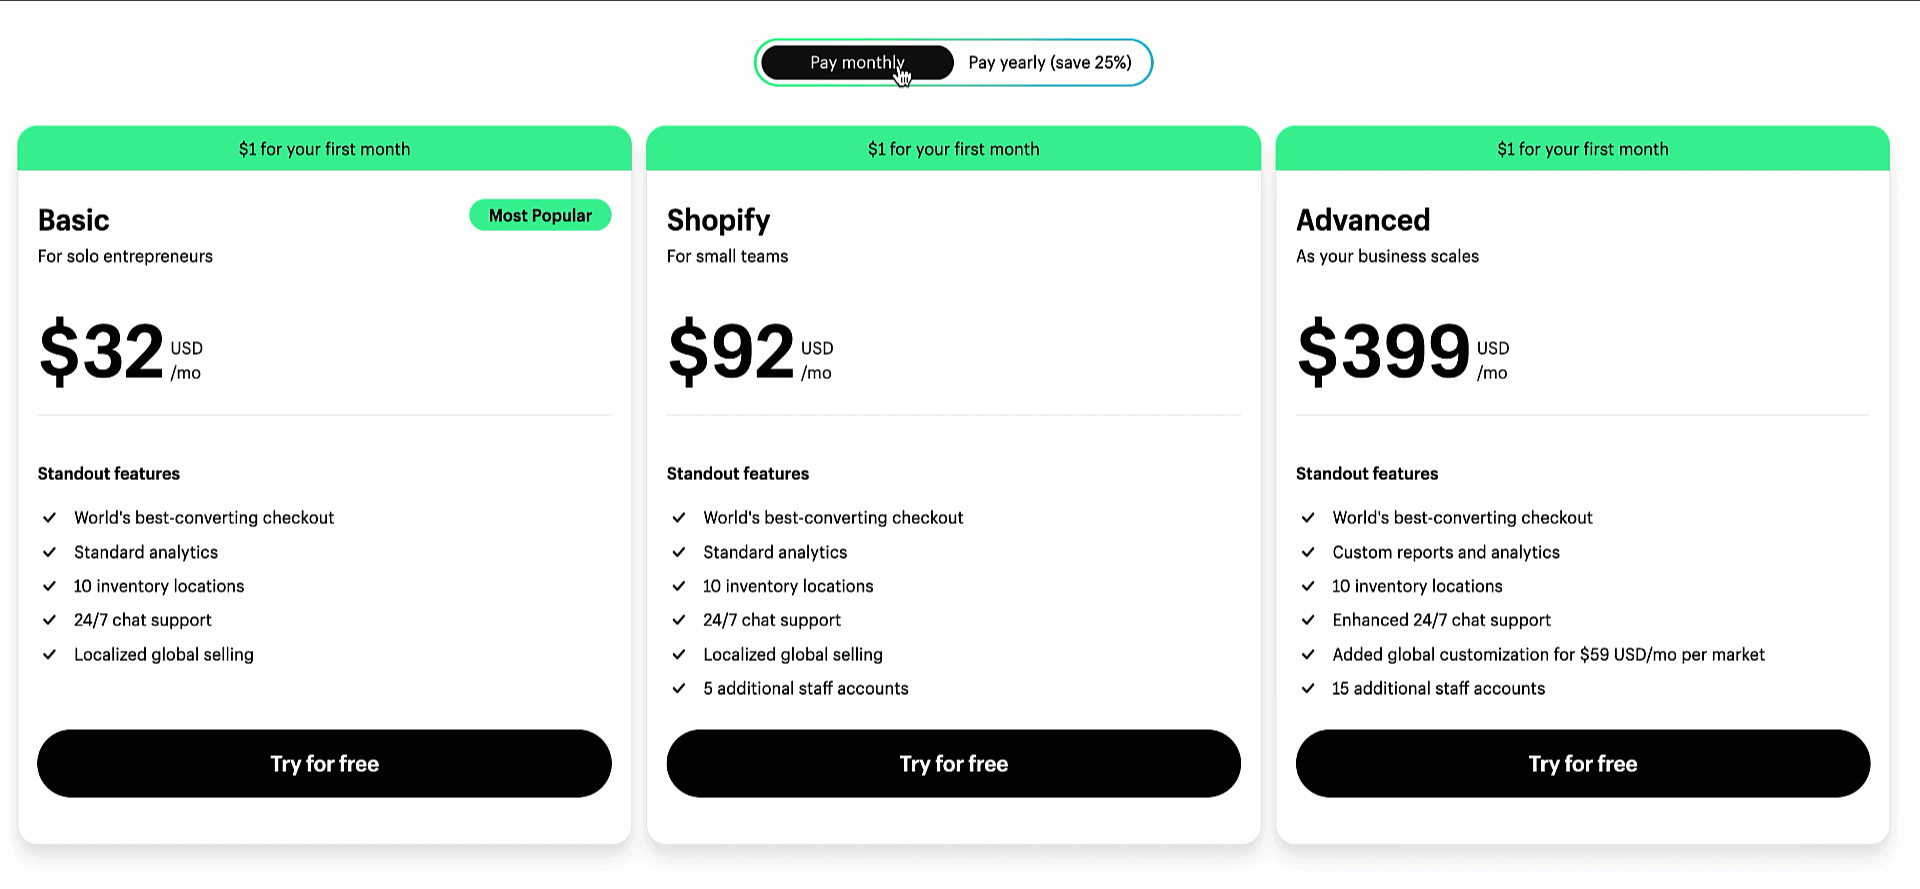 Price comparison for Shopify annual and monthly subscription